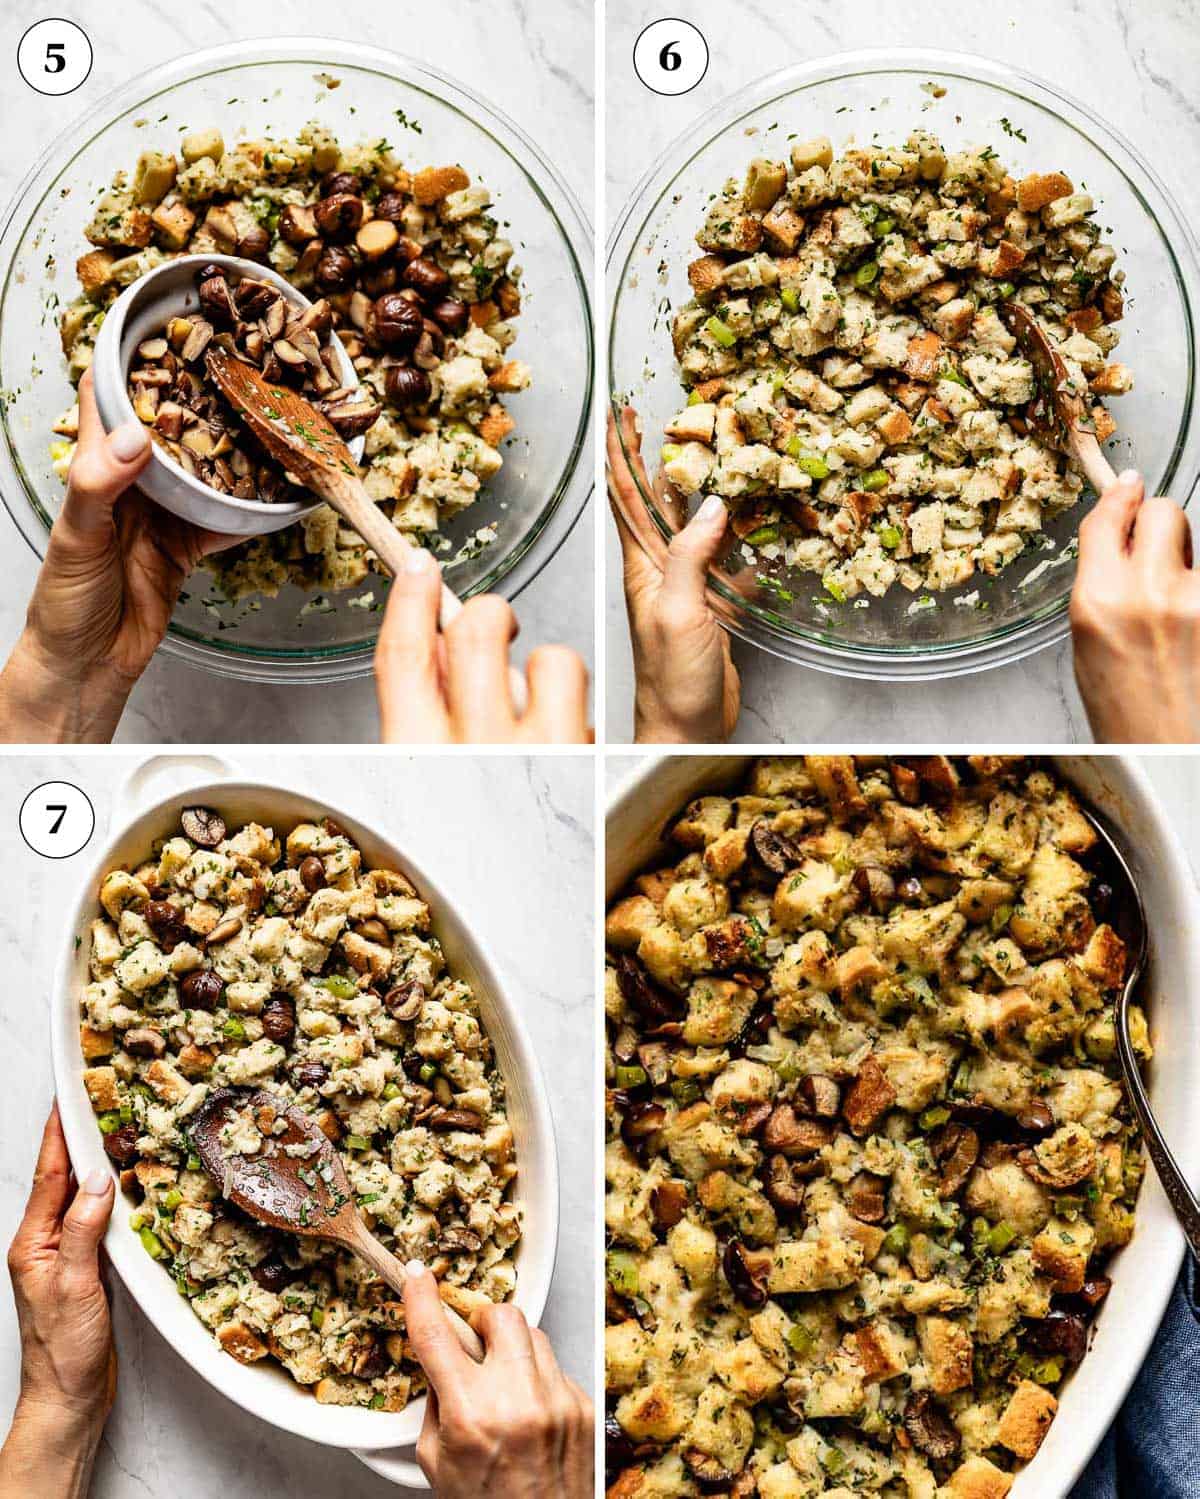 Step by step images showing how to make chestnut dressing for turkey.